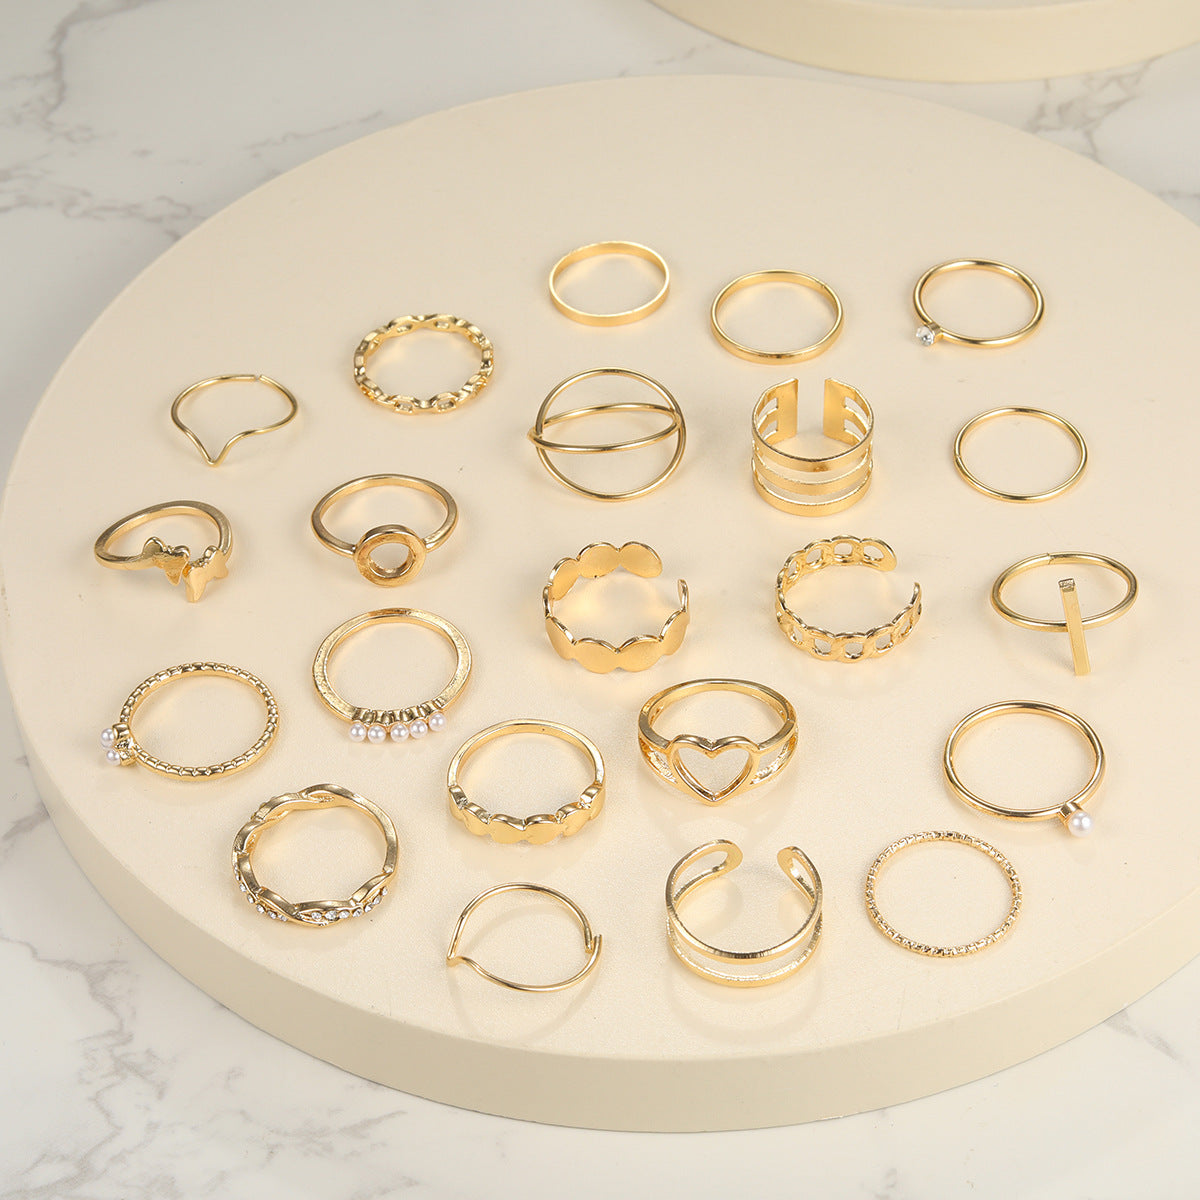 More Than Knuckle Suit Piece Set Rings